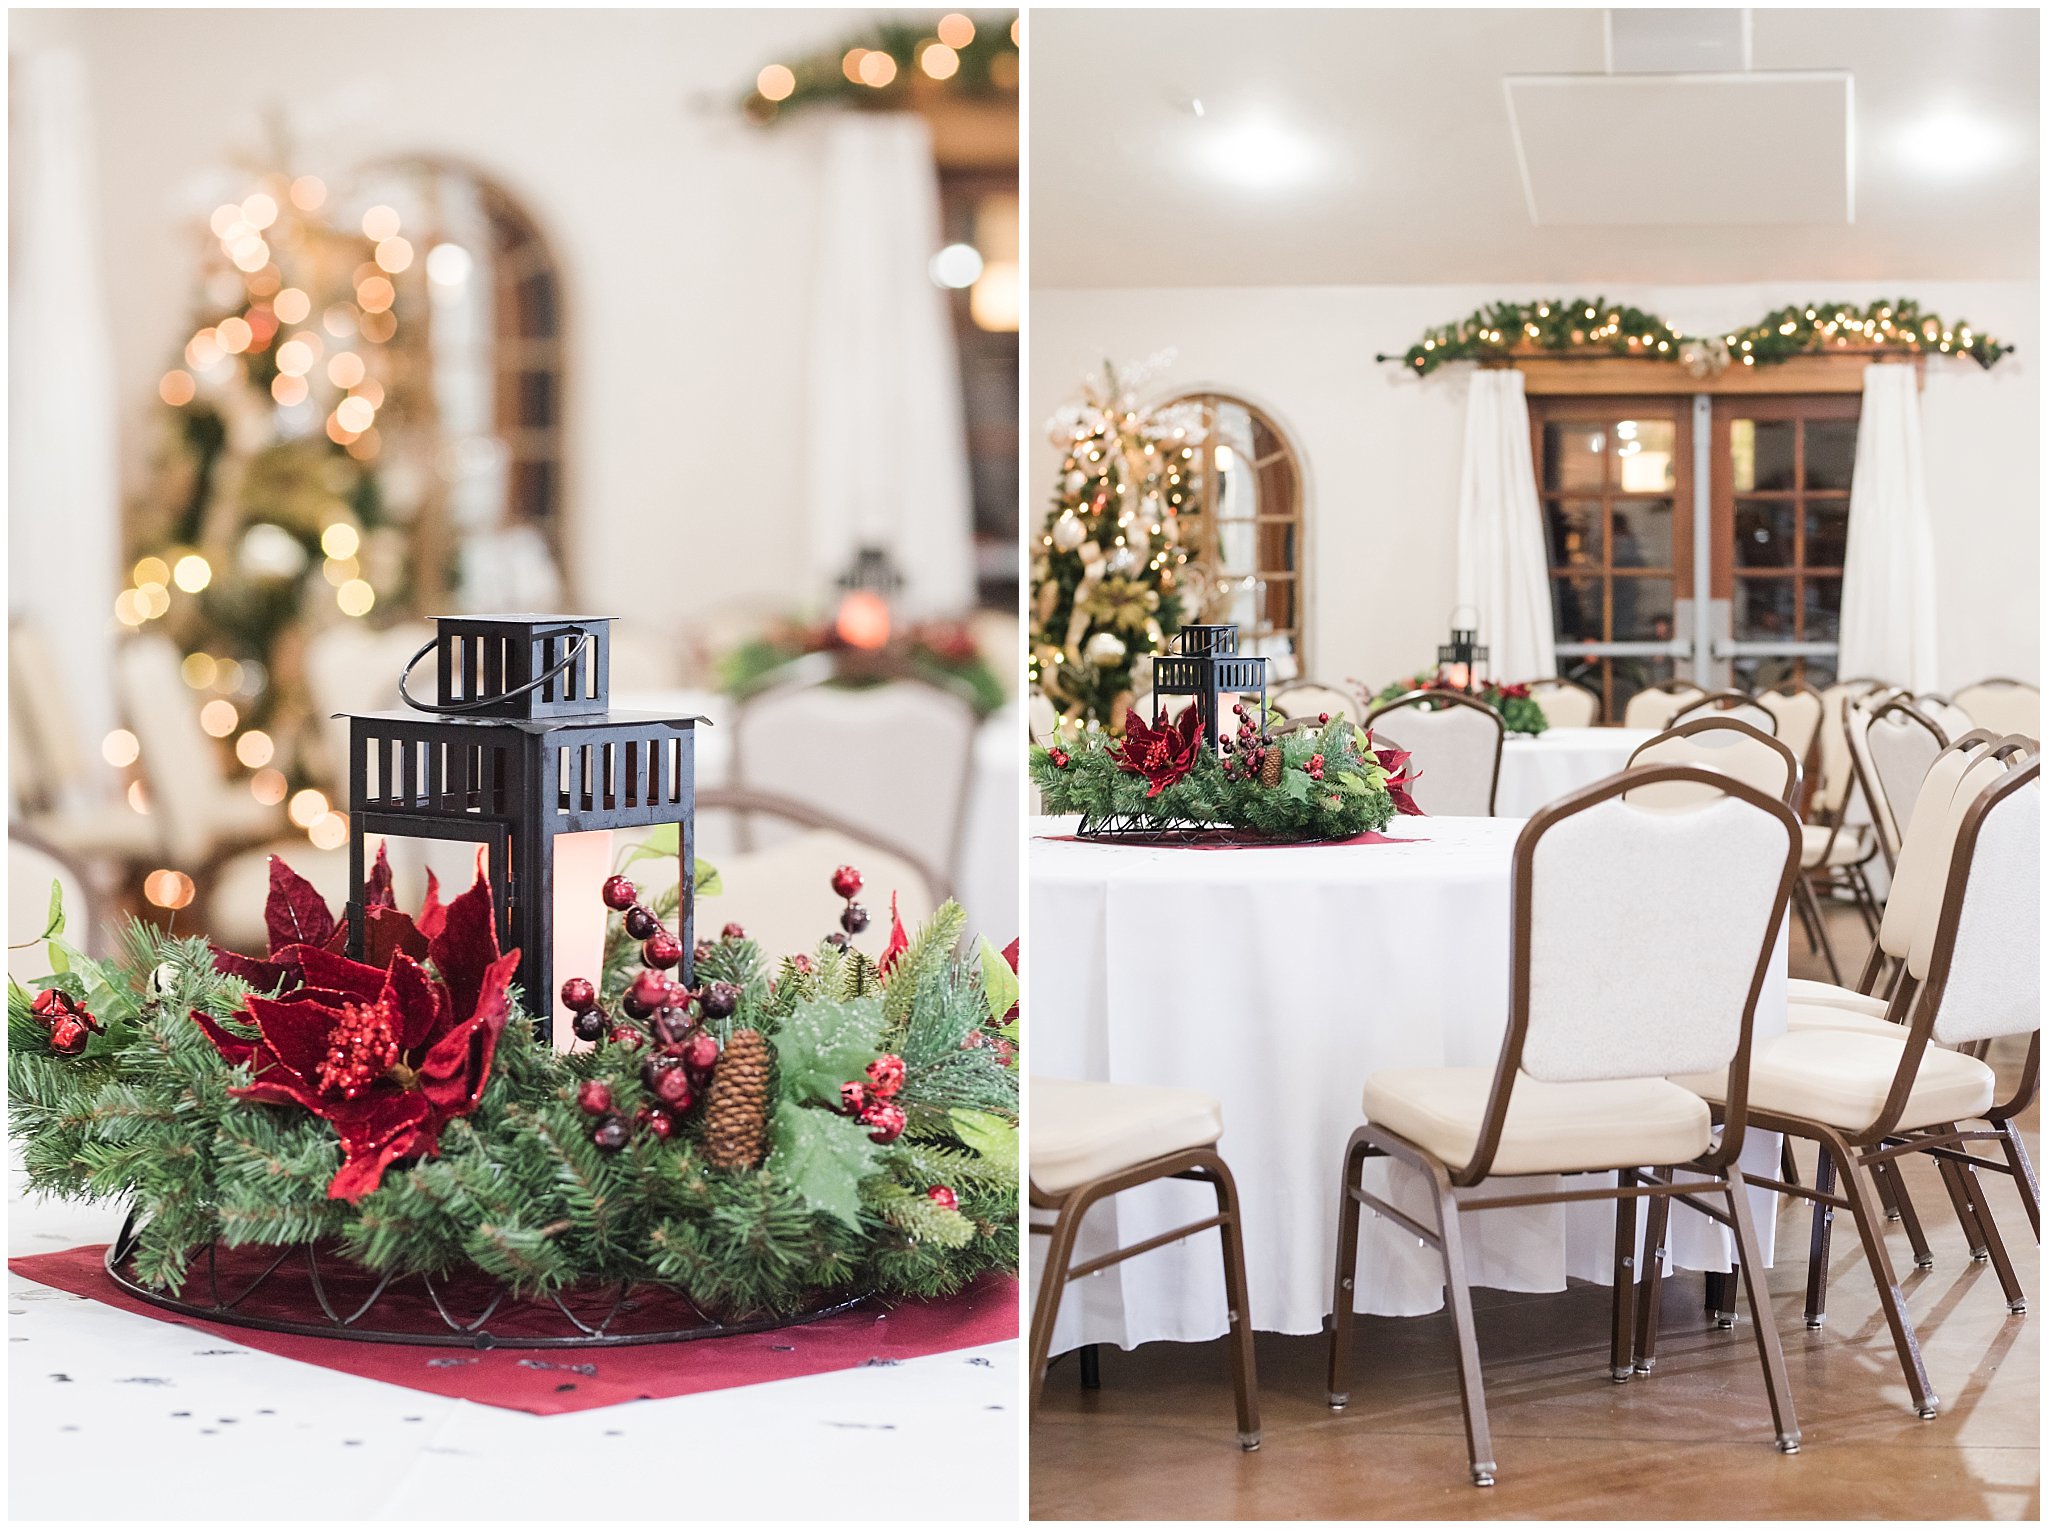 Christmas decorations at the Gathering Place at Gardner Village | Oquirrh Mountain Temple and Gardner Village Wedding | The Gathering Place | Jessie and Dallin Photography